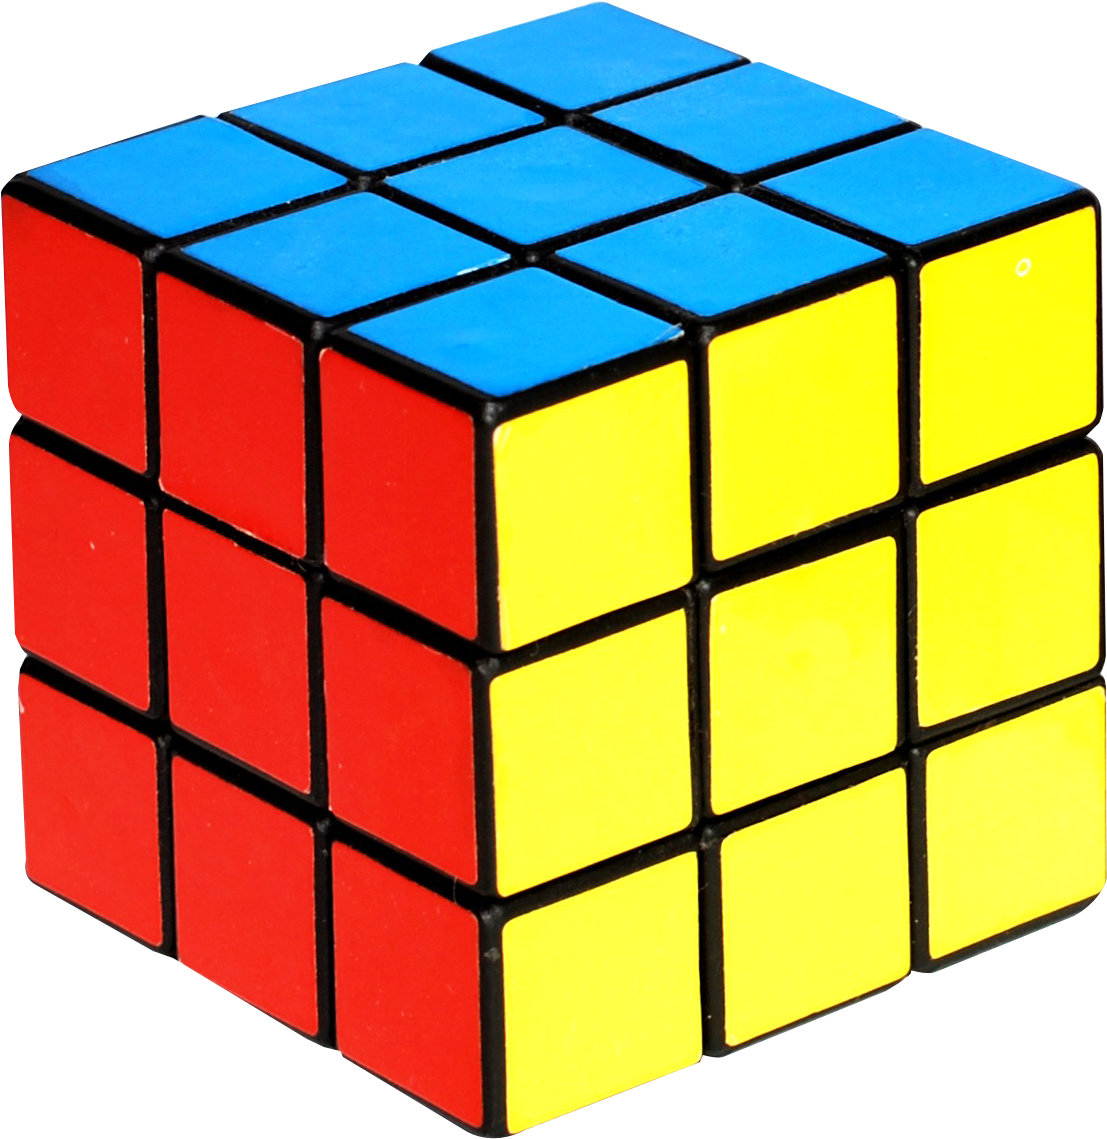 A Rubik's Cube With Different Colored Squares